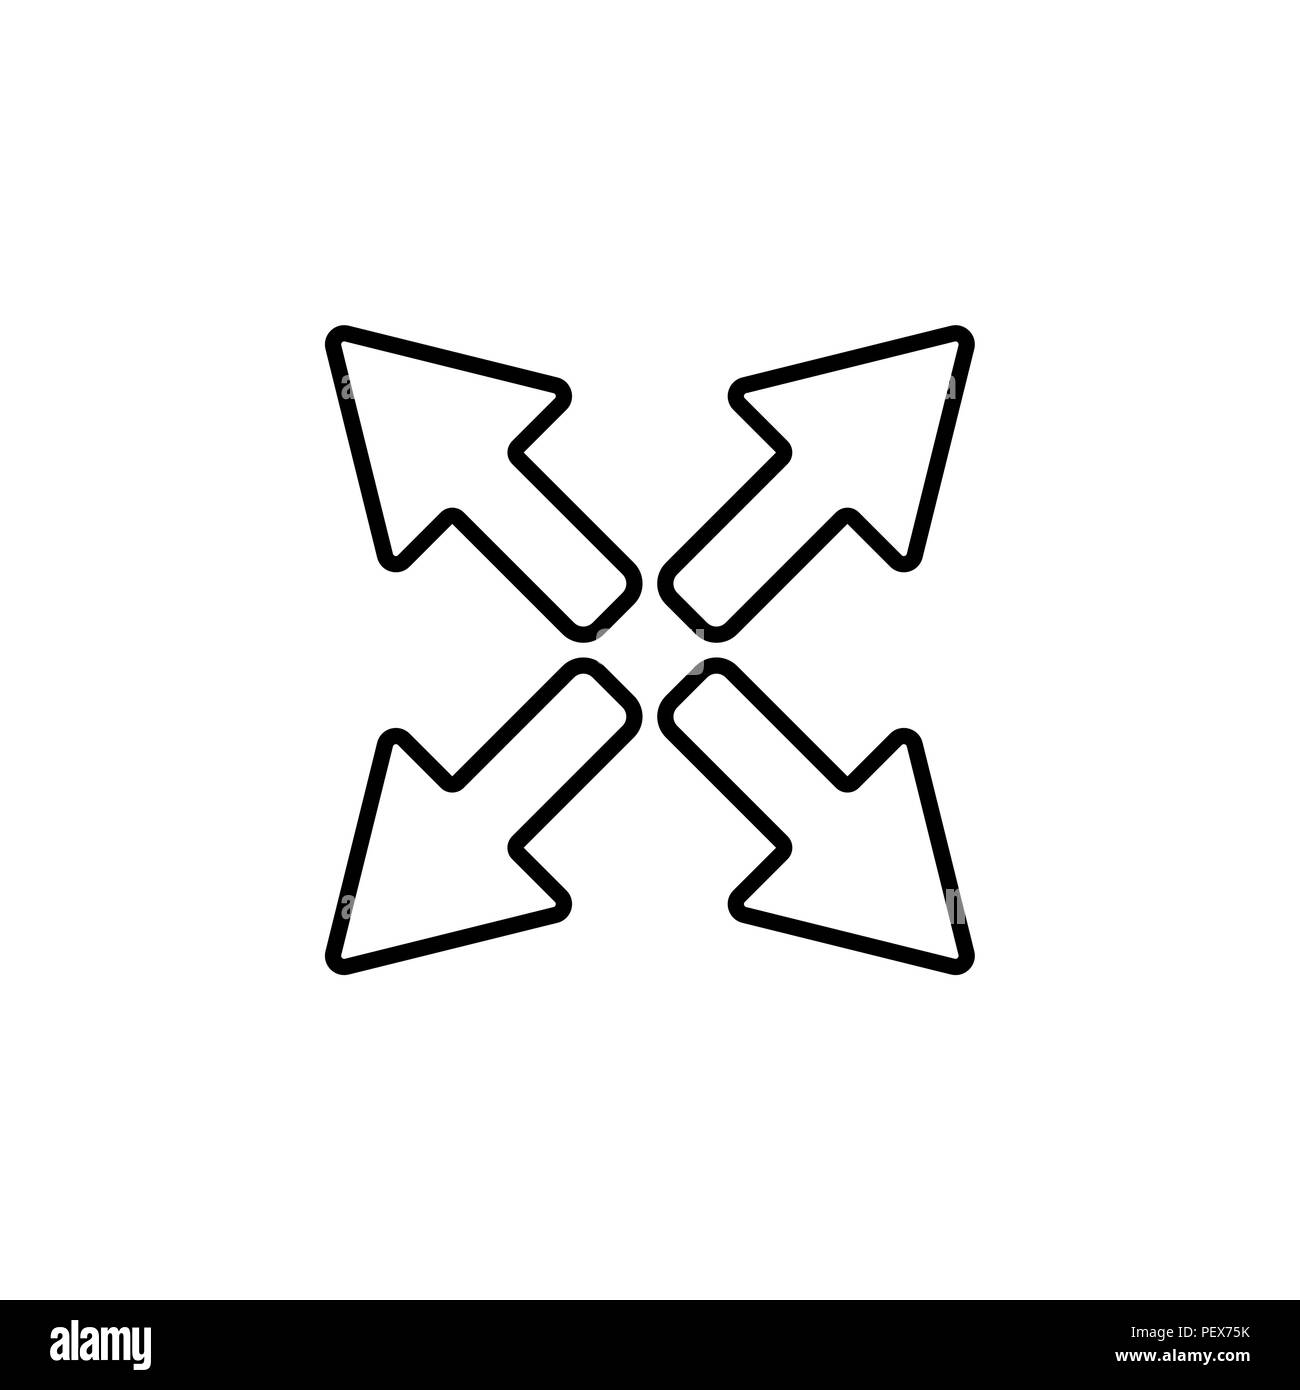 arrows line icon. vector illustration black on white background Stock Vector